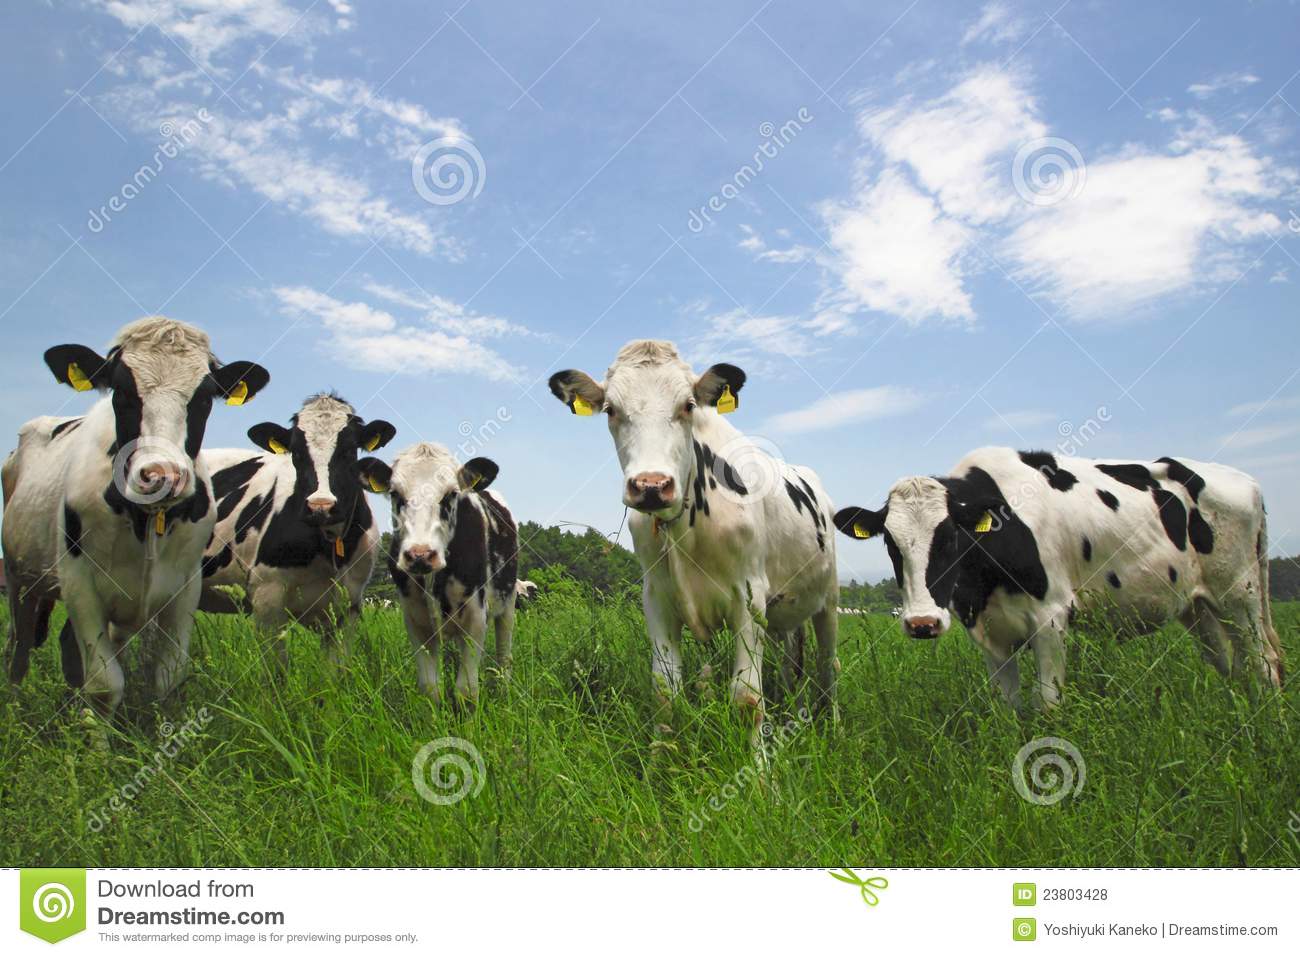 Cow In Field Royalty Free Stock Photos   Image  23803428